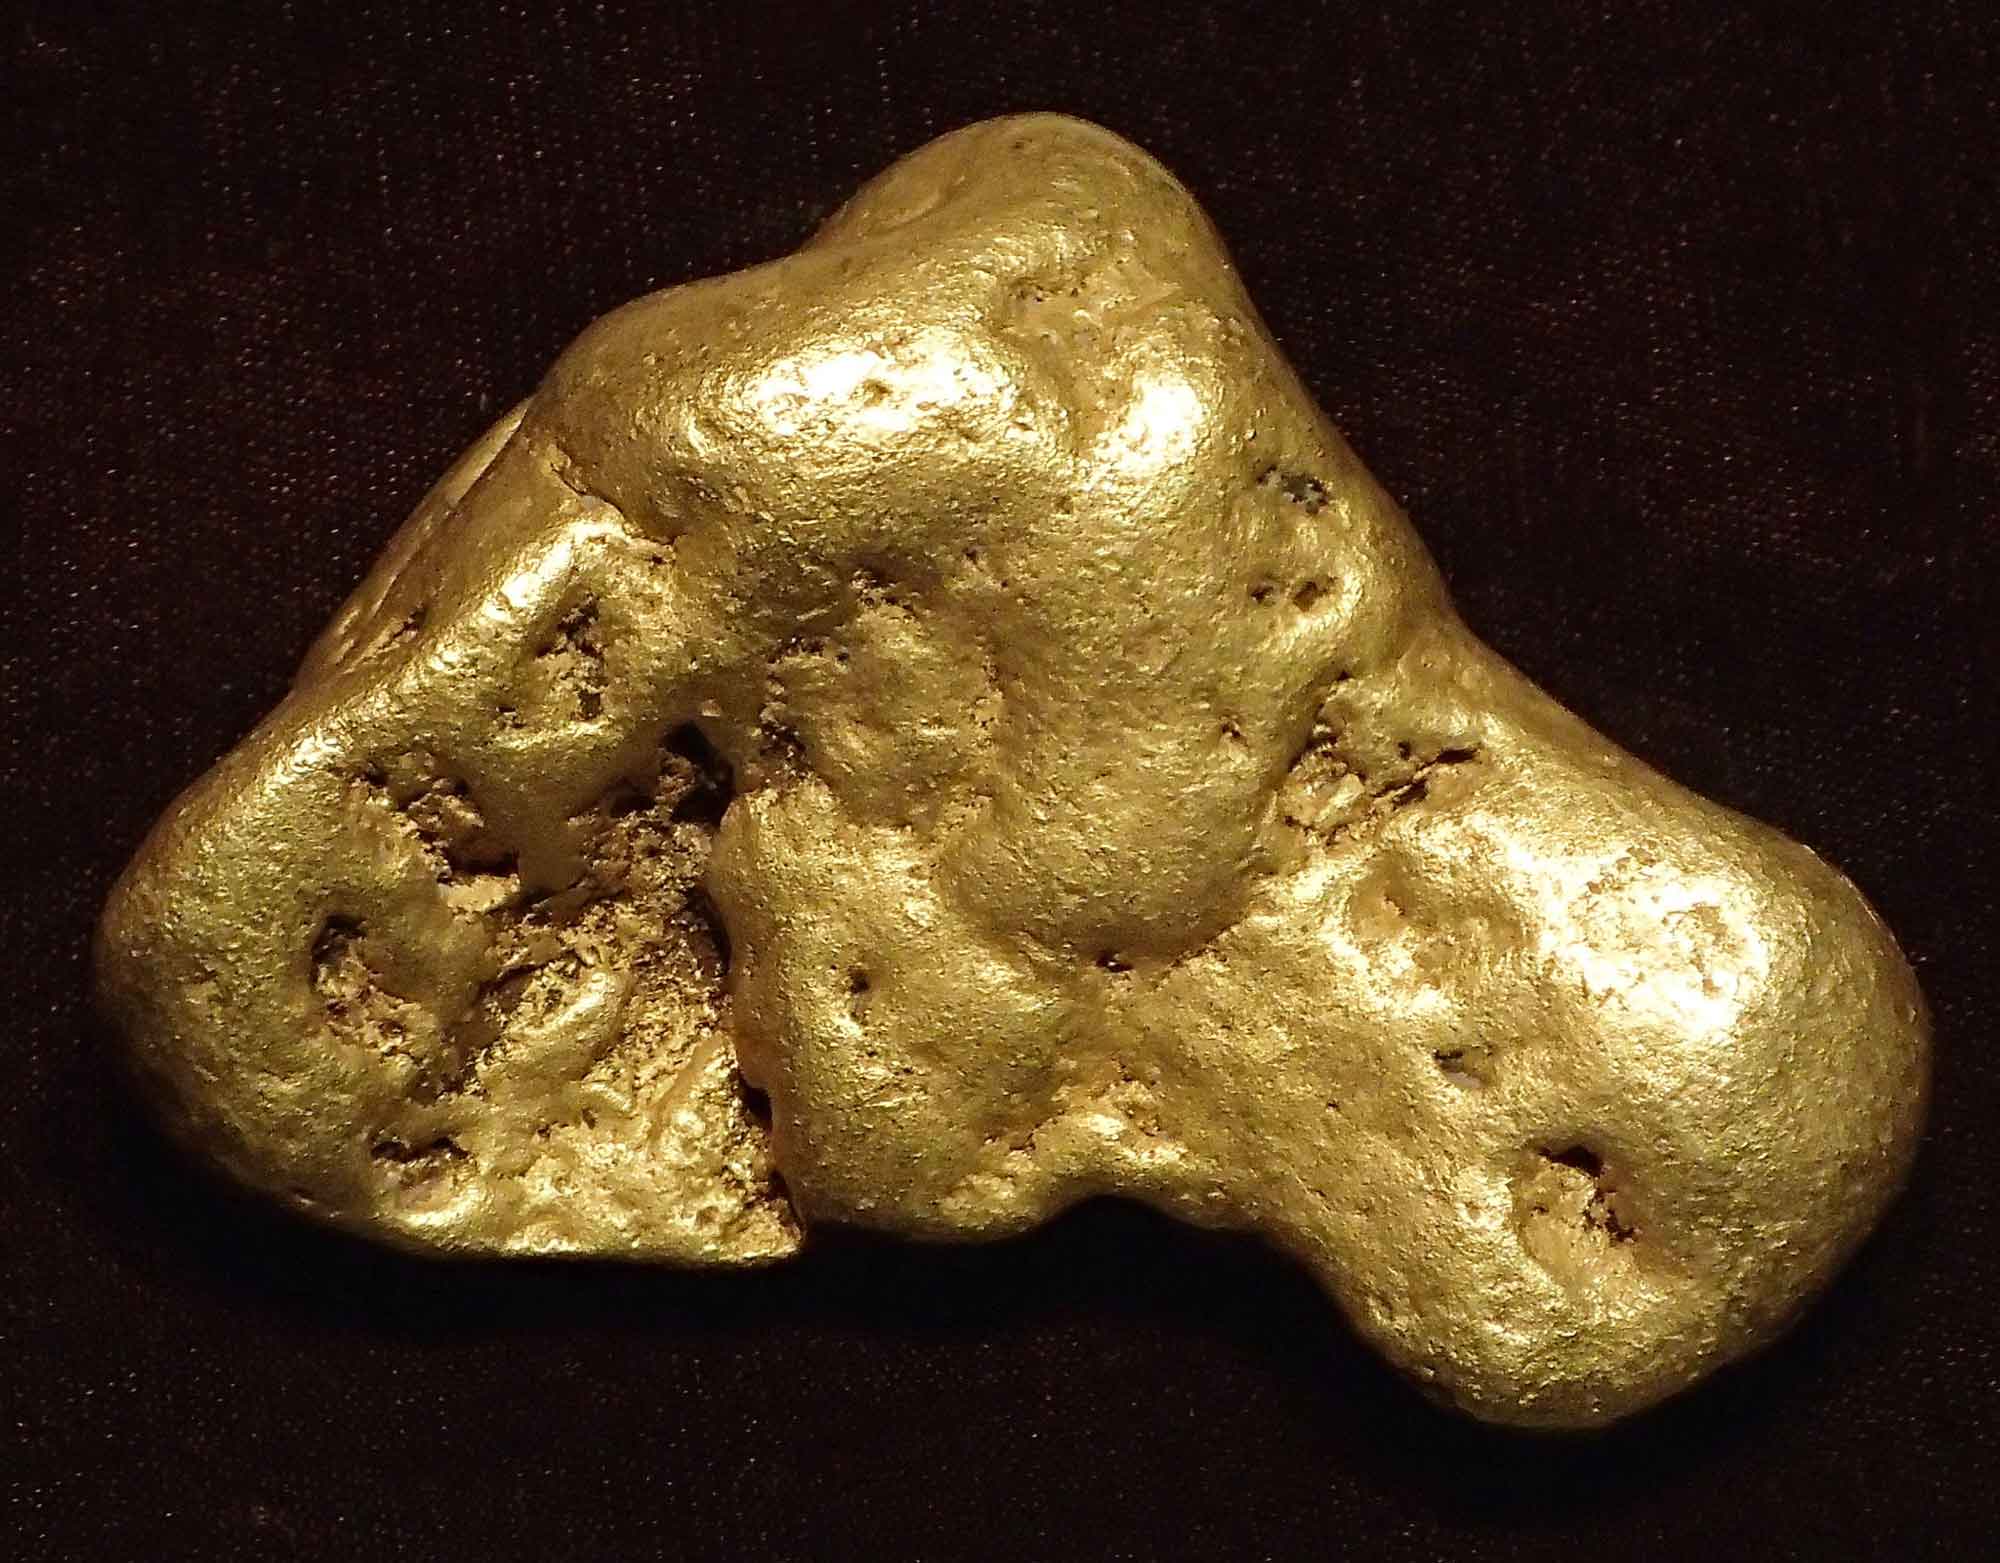 Photograph of the largest gold nugget that has been found in Colorado.